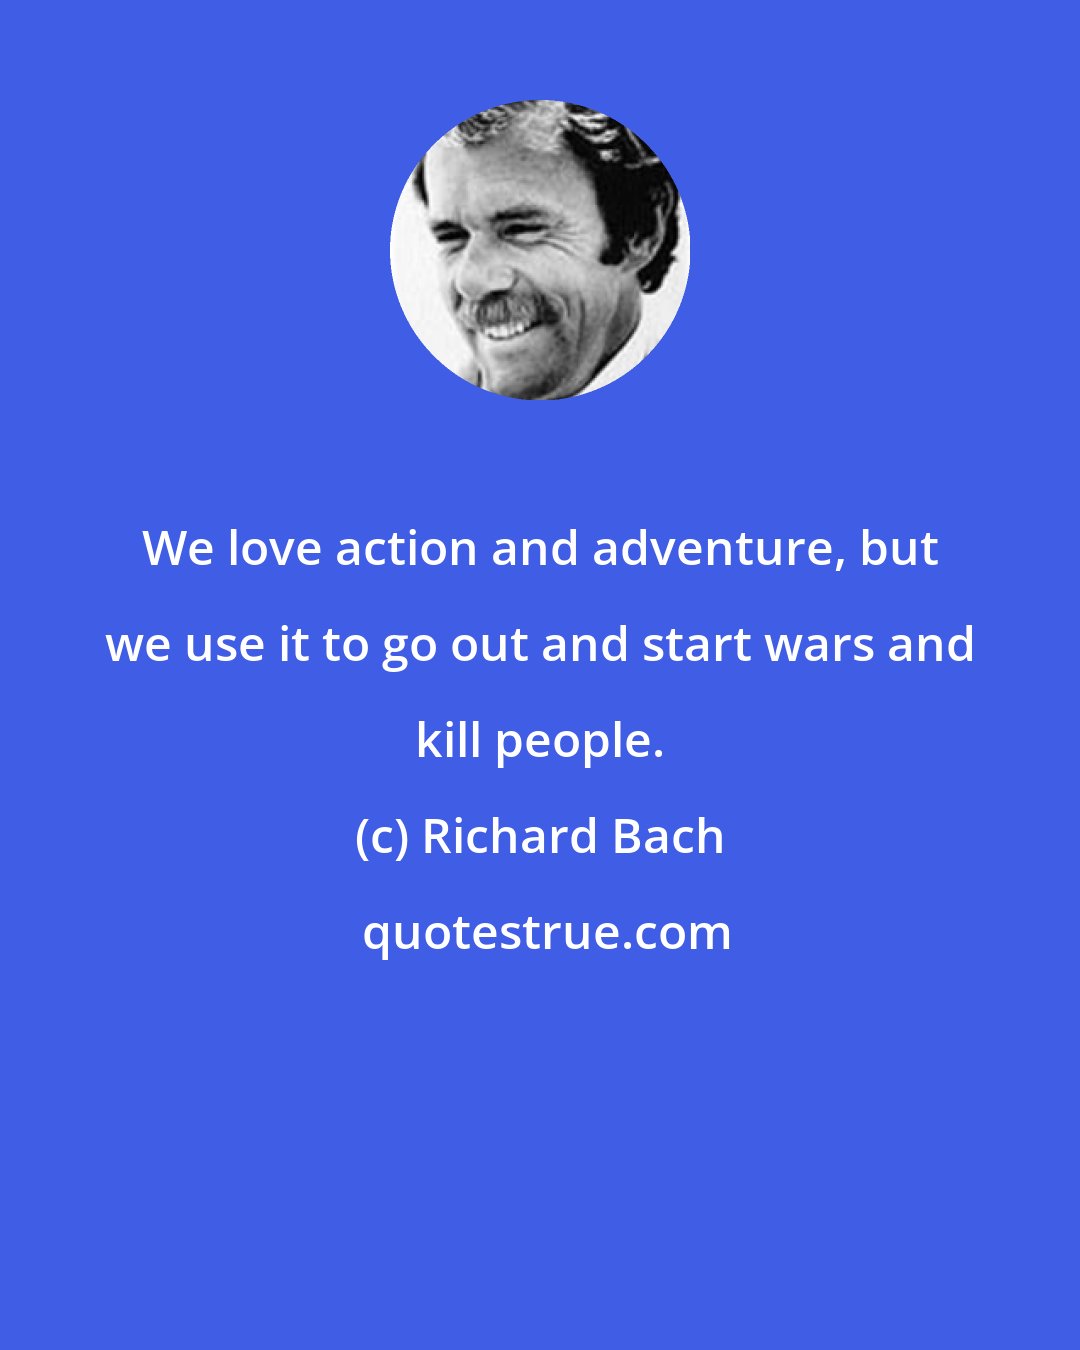 Richard Bach: We love action and adventure, but we use it to go out and start wars and kill people.